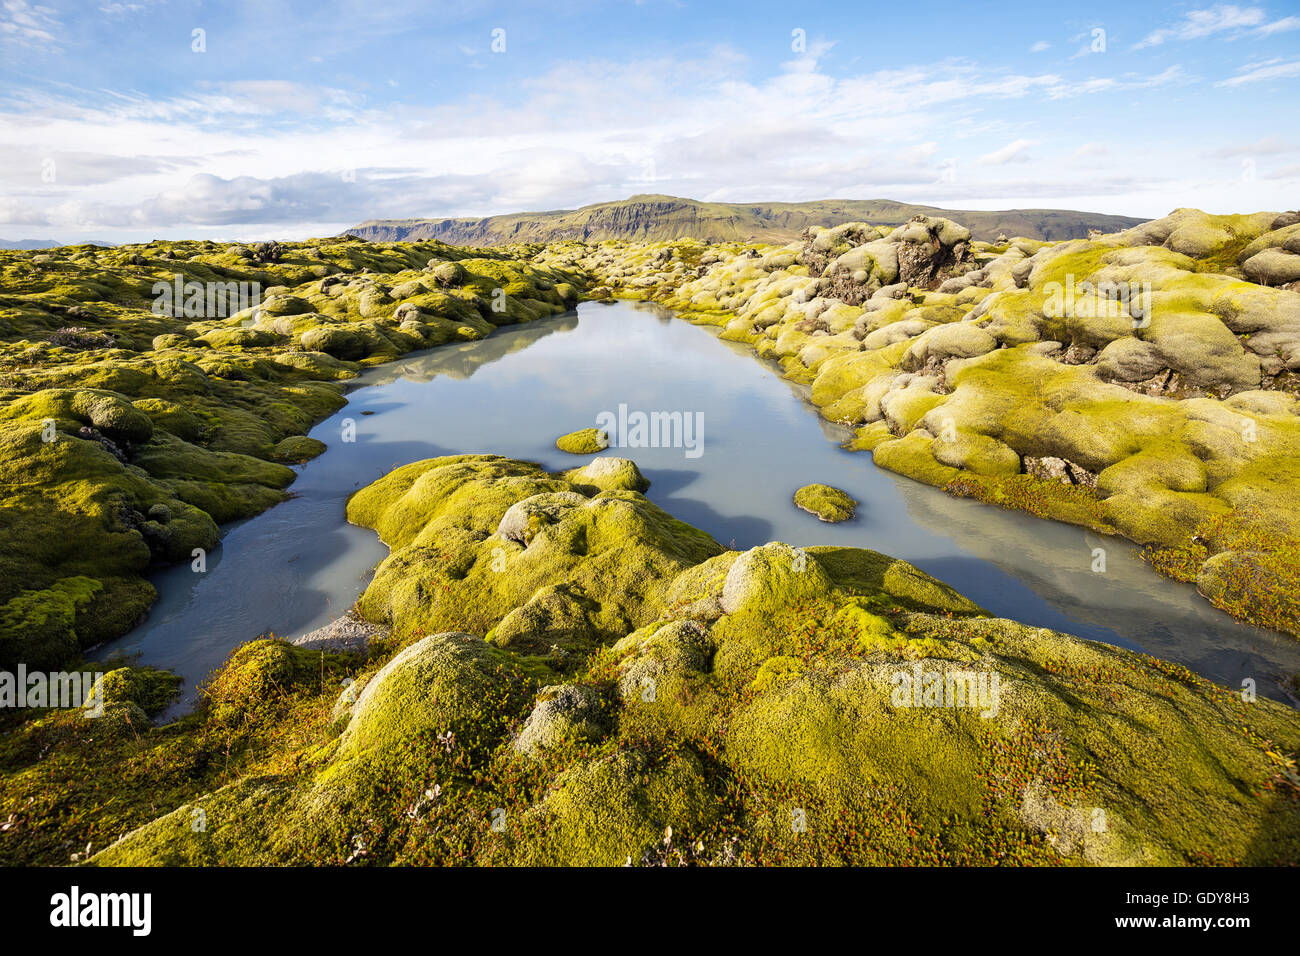 Moss grown lava field in southern Iceland with a small stream flowing through it. Stock Photo